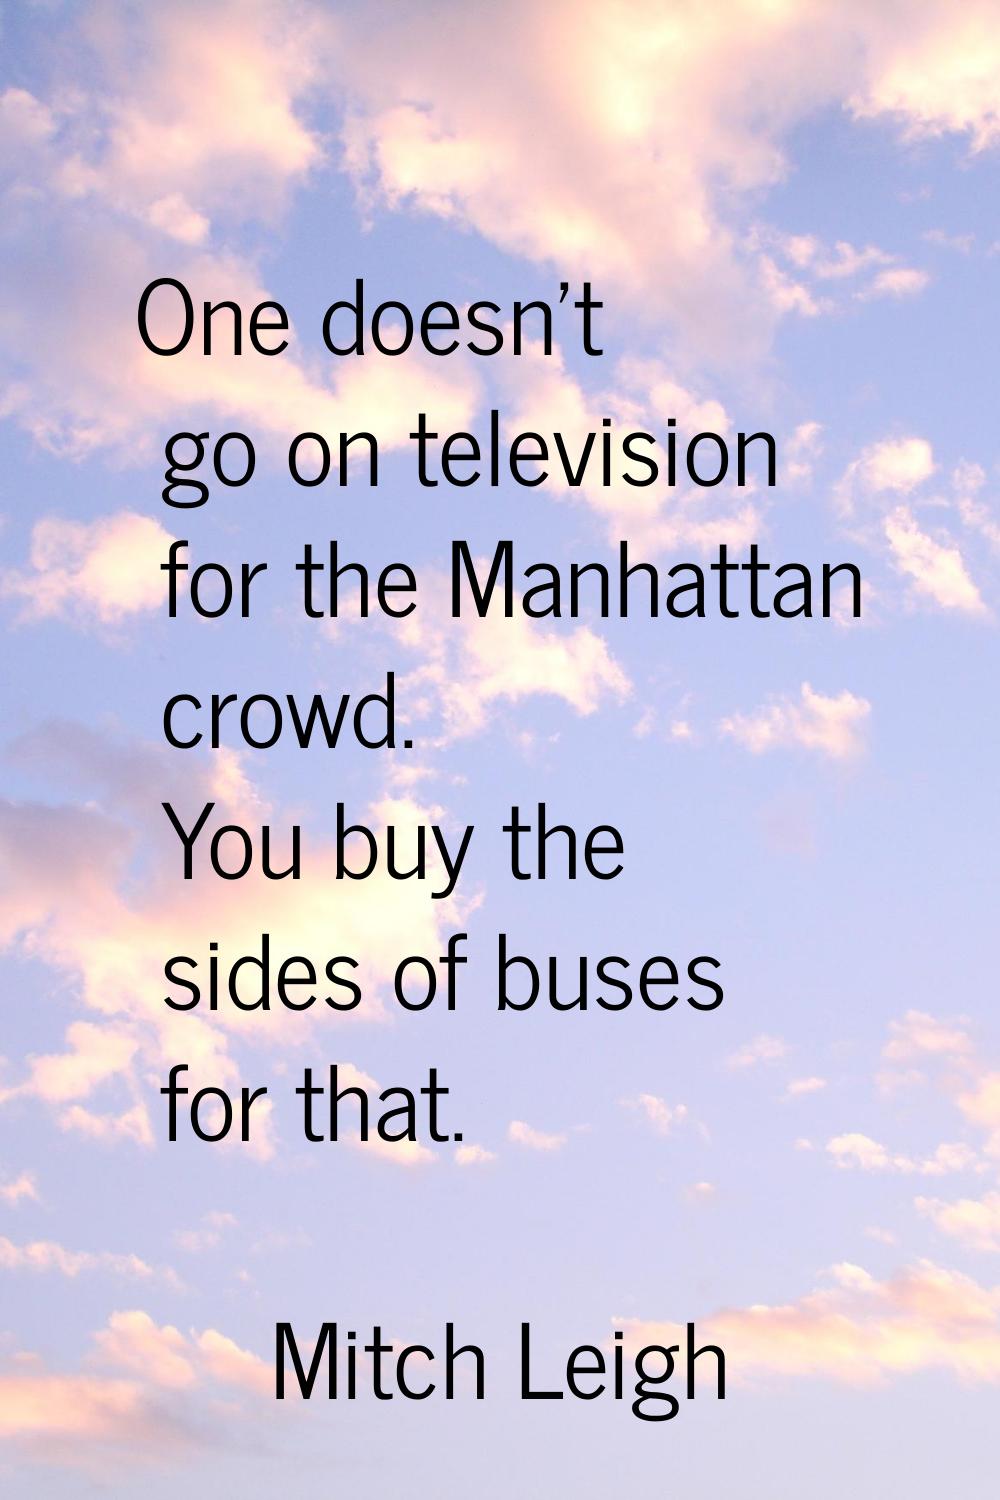 One doesn't go on television for the Manhattan crowd. You buy the sides of buses for that.